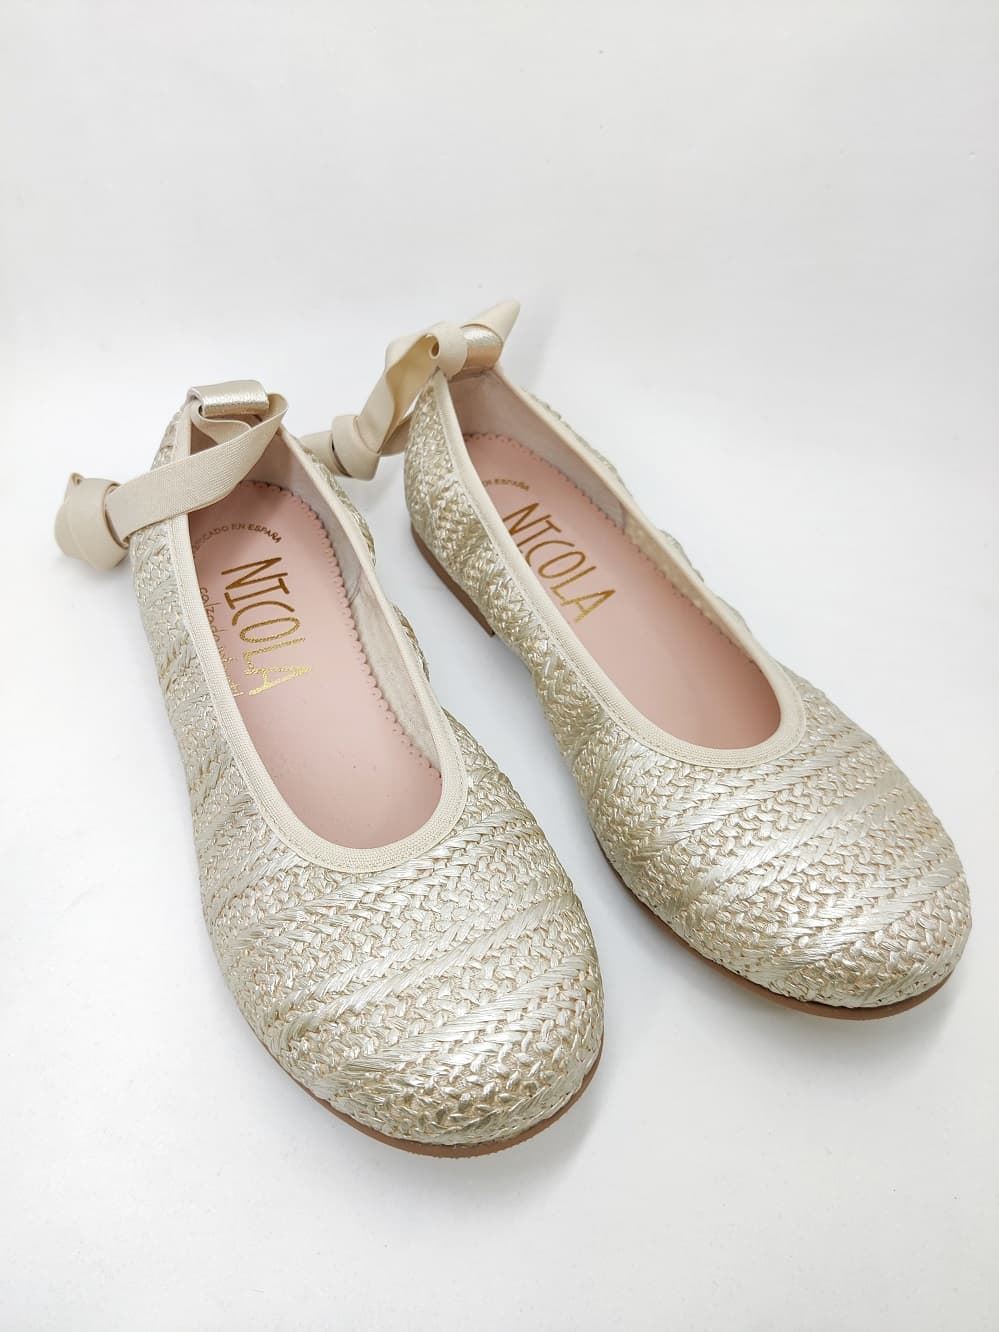 Ruth Secret Champagne Braided Leather Ballerinas - Image 4